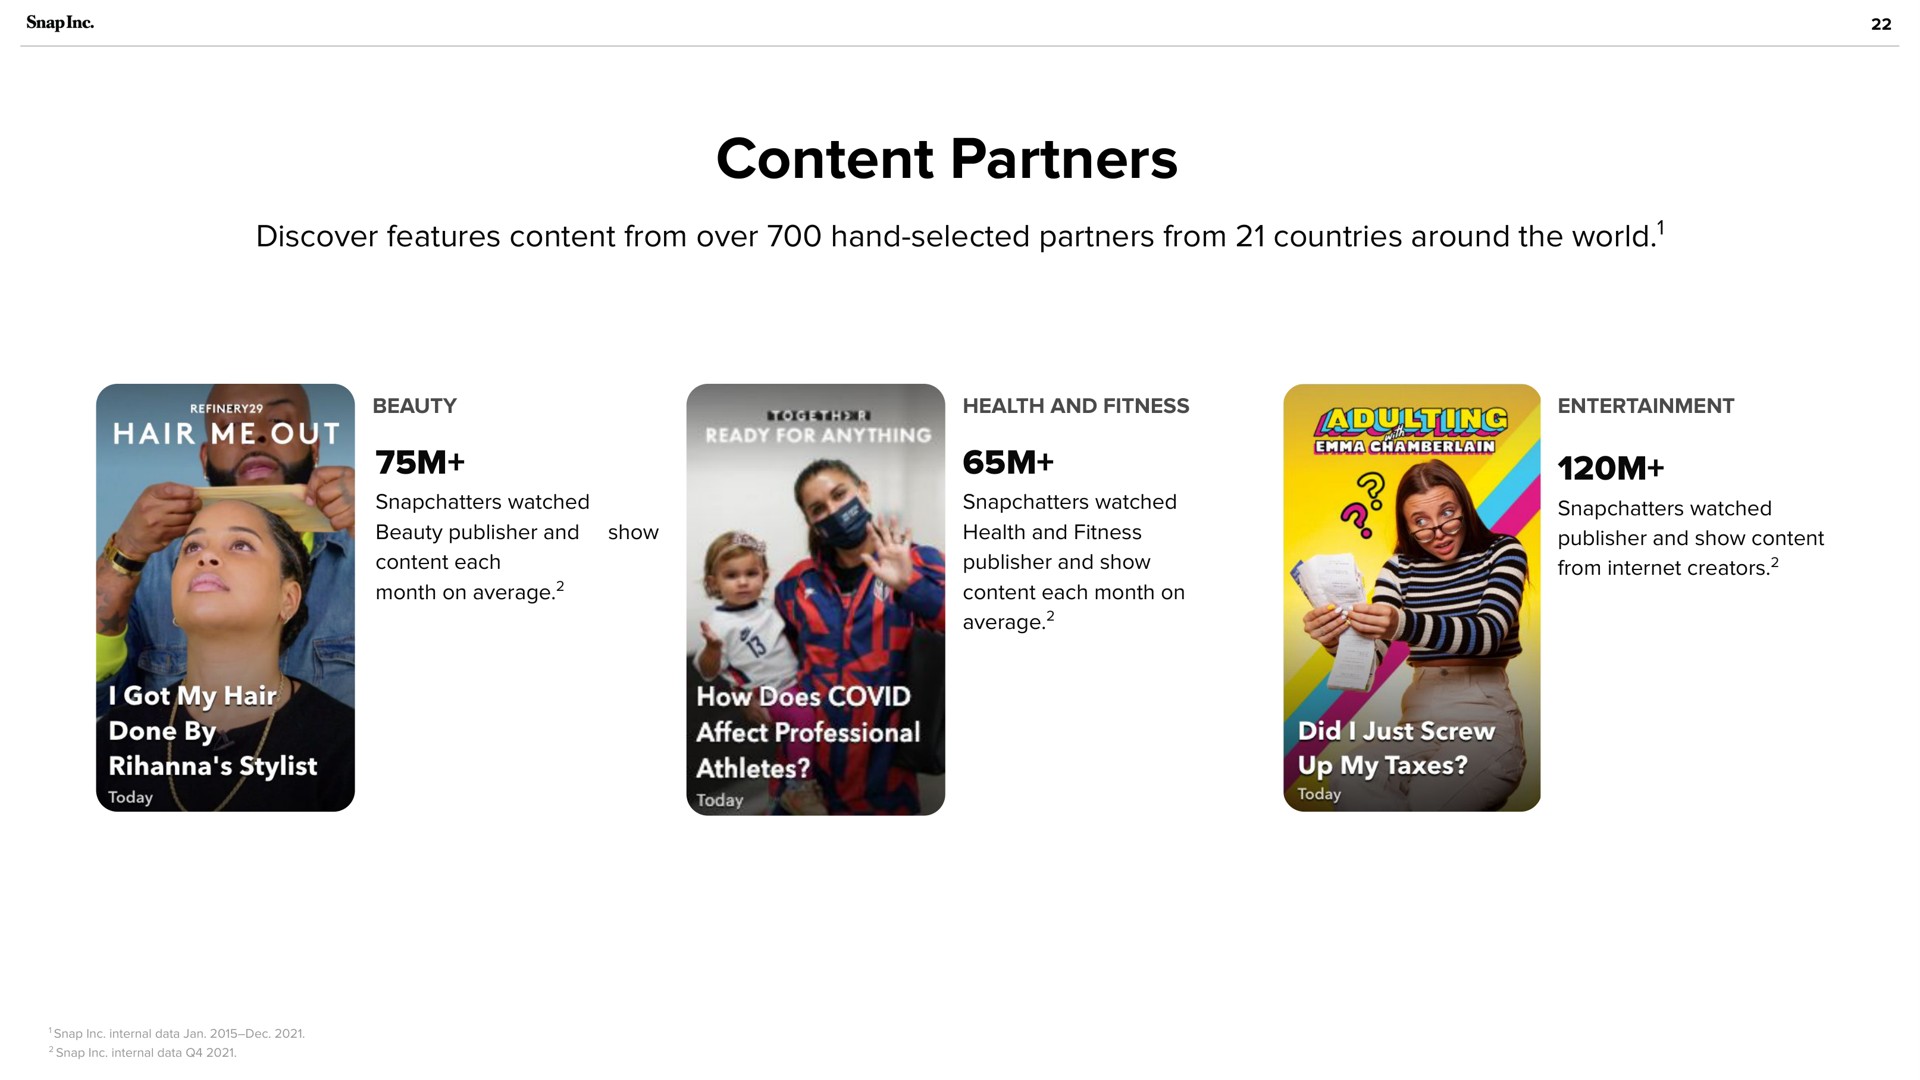 content partners how does covid | Snap Inc